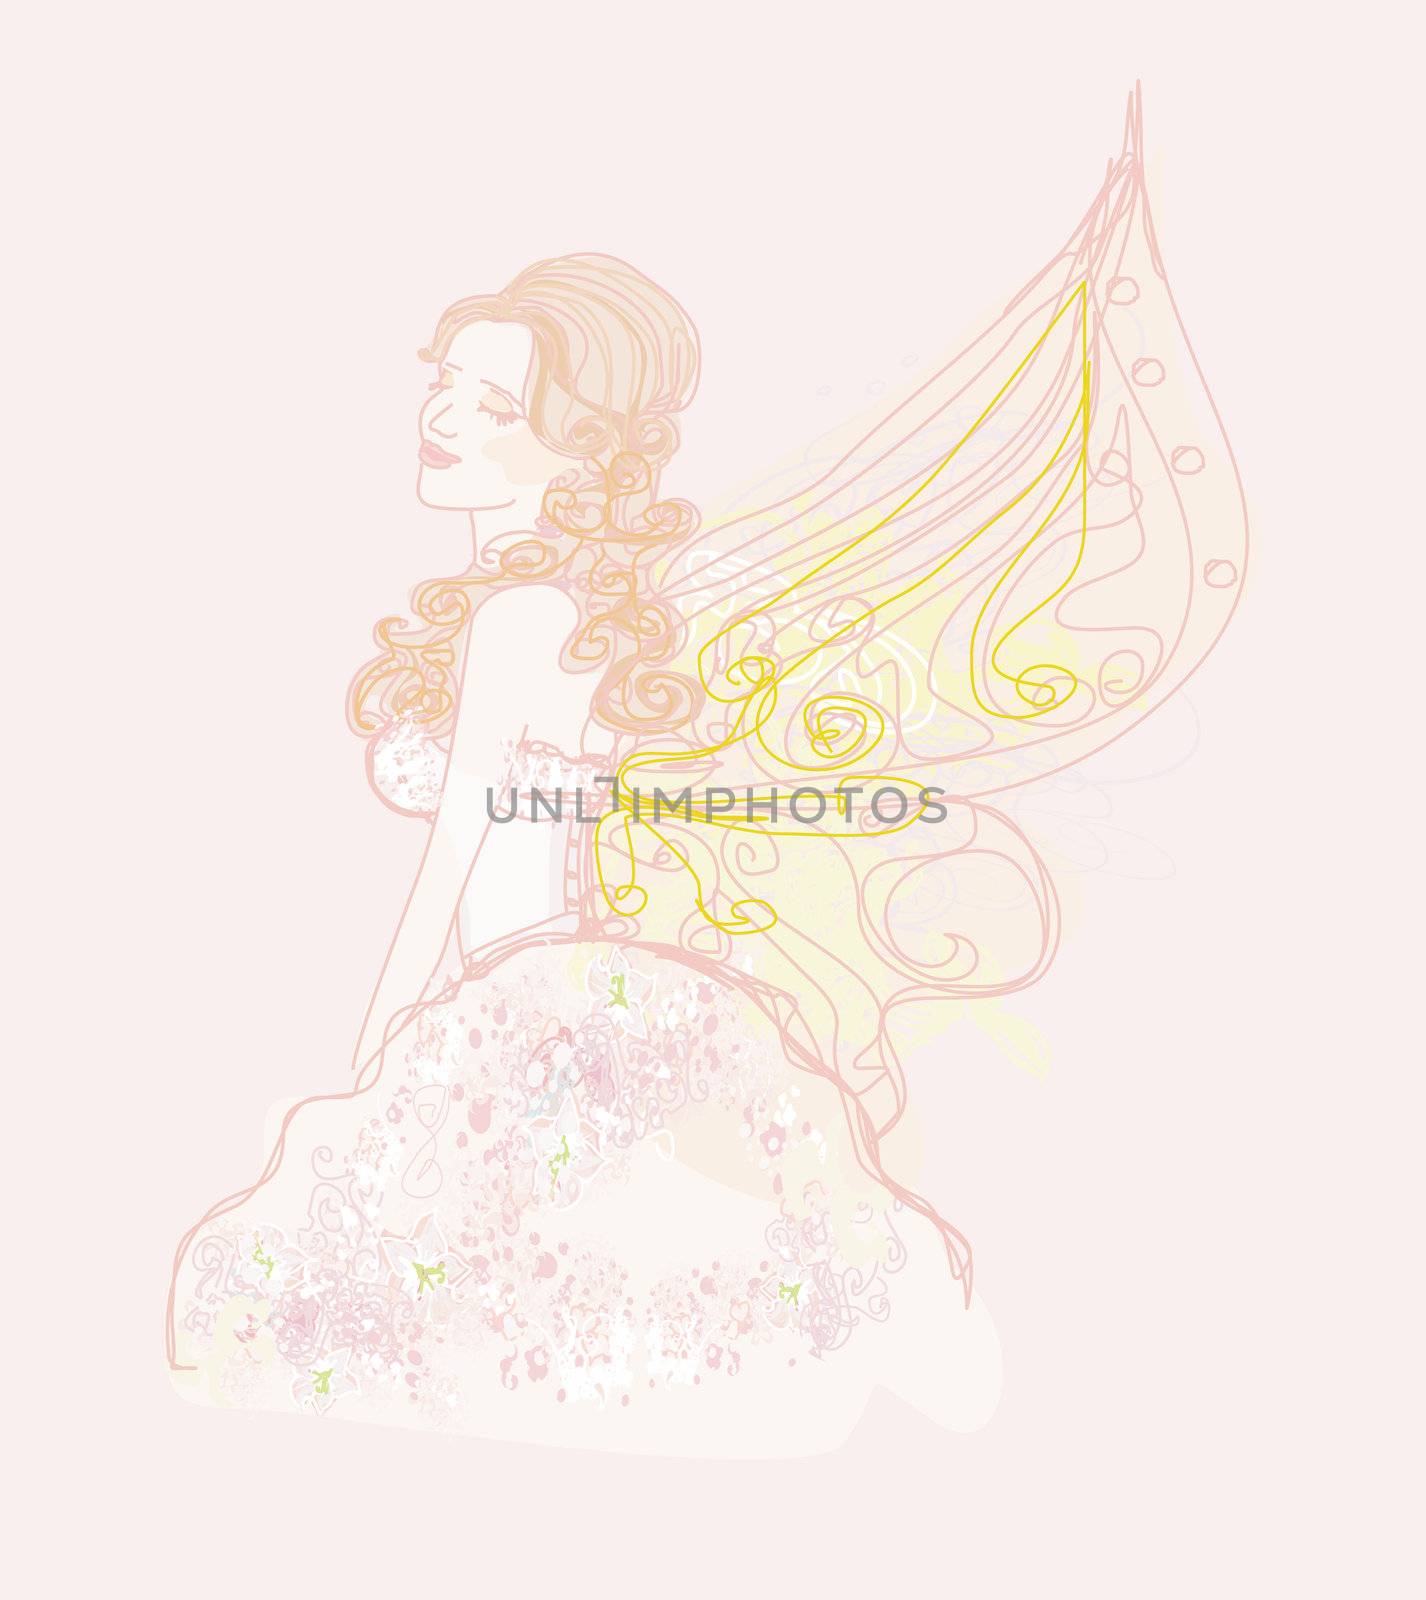 beautiful fairy vector graphic doodle